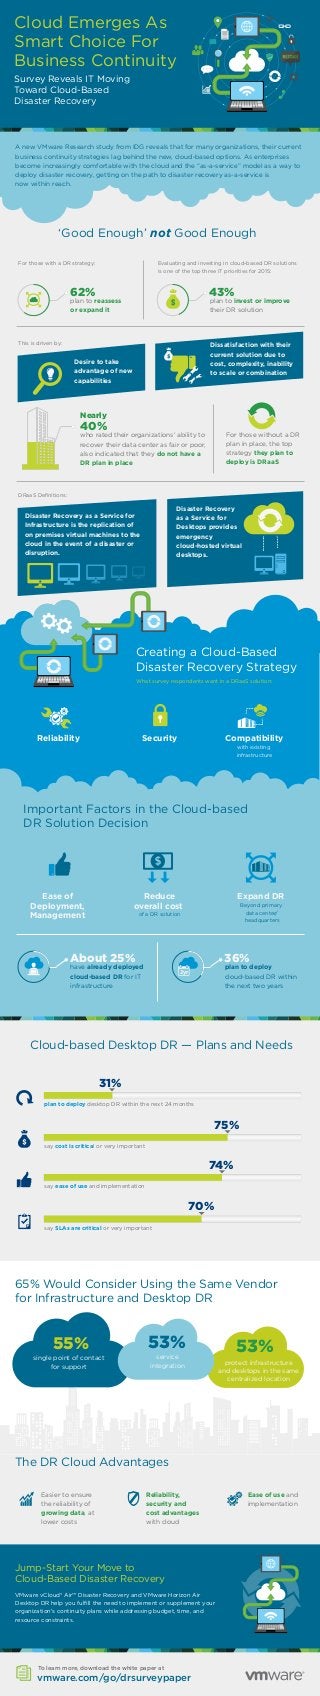 Cloud Emerges As
Smart Choice For
Business Continuity
Survey Reveals IT Moving
Toward Cloud-Based
Disaster Recovery
A new VMware Research study from IDG reveals that for many organizations, their current
business continuity strategies lag behind the new, cloud-based options. As enterprises
become increasingly comfortable with the cloud and the “as-a-service” model as a way to
deploy disaster recovery, getting on the path to disaster recovery as-a-service is
now within reach.
‘Good Enough’ not Good Enough
plan to reassess
or expand it
62%
For those with a DR strategy:
plan to invest or improve
their DR solution
43%
Evaluating and investing in cloud-based DR solutions
is one of the top three IT priorities for 2015:
This is driven by:
Desire to take
advantage of new
capabilities
Dissatisfaction with their
current solution due to
cost, complexity, inability
to scale or combination
40%
Nearly
who rated their organizations' ability to
recover their data center as fair or poor,
also indicated that they do not have a
DR plan in place
For those without a DR
plan in place, the top
strategy they plan to
deploy is DRaaS
DRaaS Deﬁnitions:
Disaster Recovery as a Service for
Infrastructure is the replication of
on premises virtual machines to the
cloud in the event of a disaster or
disruption.
Disaster Recovery
as a Service for
Desktops provides
emergency
cloud-hosted virtual
desktops.
Creating a Cloud-Based
Disaster Recovery Strategy
What survey respondents want in a DRaaS solution:
Reliability Security Compatibility
with existing
infrastructure
Important Factors in the Cloud-based
DR Solution Decision
Ease of
Deployment,
Management
Reduce
overall cost
of a DR solution
Expand DR
Beyond primary
data center/
headquarters
have already deployed
cloud-based DR for IT
infrastructure
About 25%
plan to deploy
cloud-based DR within
the next two years
36%
2yr
Cloud-based Desktop DR — Plans and Needs
plan to deploy desktop DR within the next 24 months
31%
say cost is critical or very important
75%
say ease of use and implementation
74%
say SLAs are critical or very important
70%
65% Would Consider Using the Same Vendor
for Infrastructure and Desktop DR
single point of contact
for support
55%
service
integration
53%
protect infrastructure
and desktops in the same
centralized location
53%
The DR Cloud Advantages
Easier to ensure
the reliability of
growing data, at
lower costs
Reliability,
security and
cost advantages
with cloud
Ease of use and
implementation
Jump-Start Your Move to
Cloud-Based Disaster Recovery
To learn more, download the white paper at
www.vmware.com/go/drsurveypaper
VMware vCloud® Air™ Disaster Recovery and VMware Horizon Air
Desktop DR help you fulﬁll the need to implement or supplement your
organization's continuity plans while addressing budget, time, and
resource constraints.
 